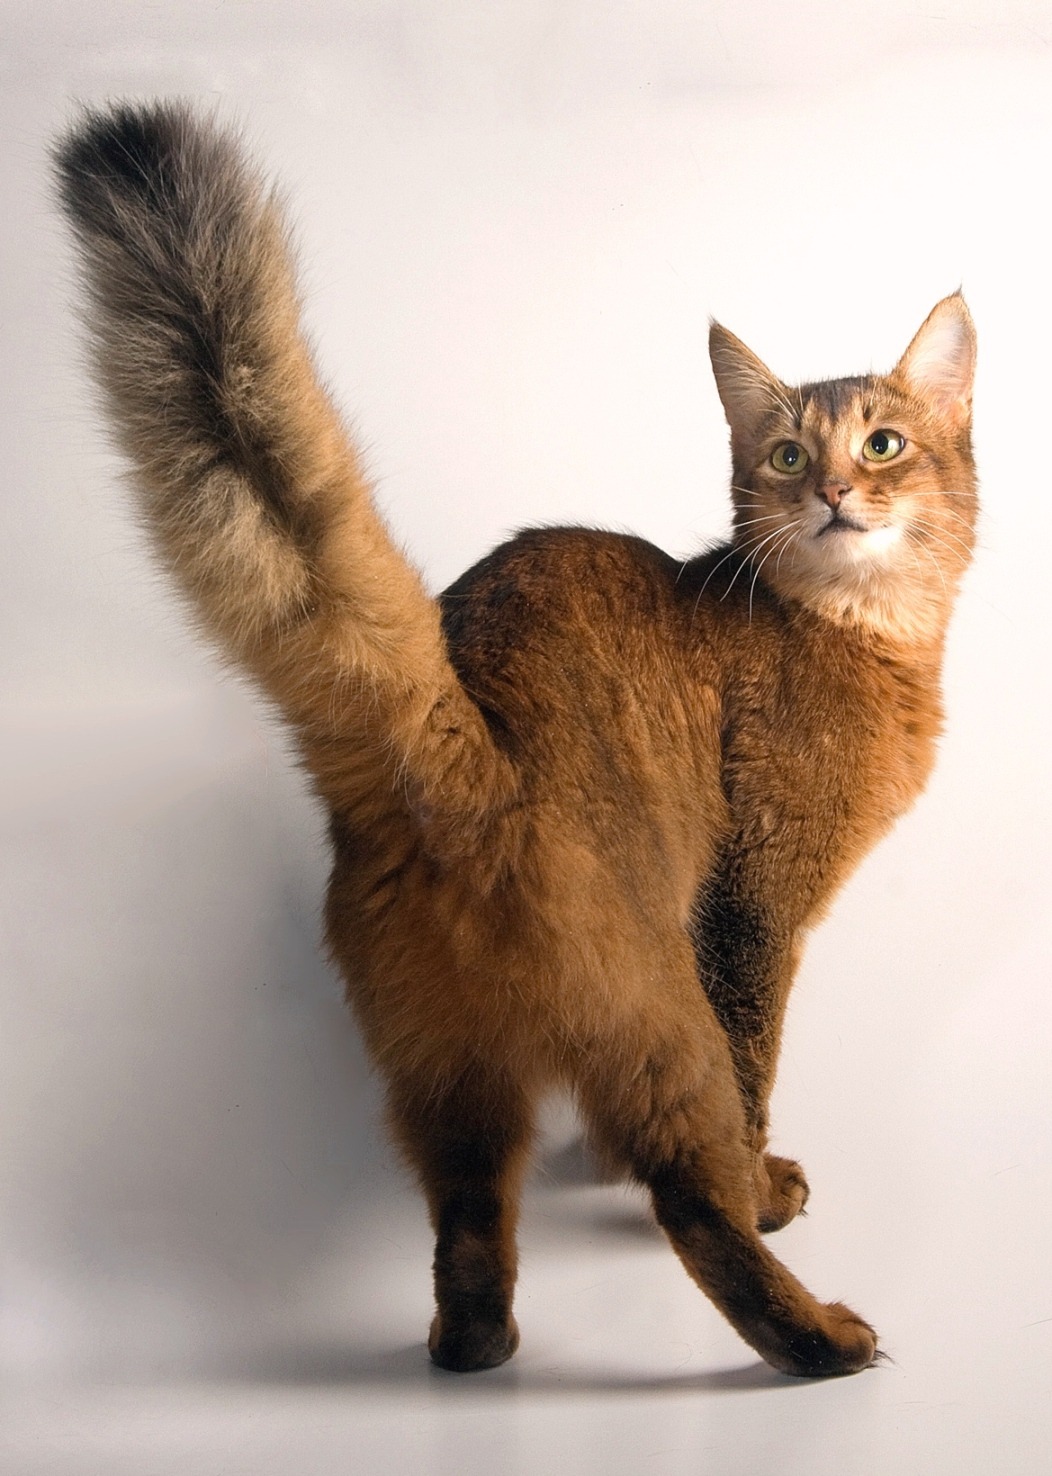 The Determined and Animated Somali Cat